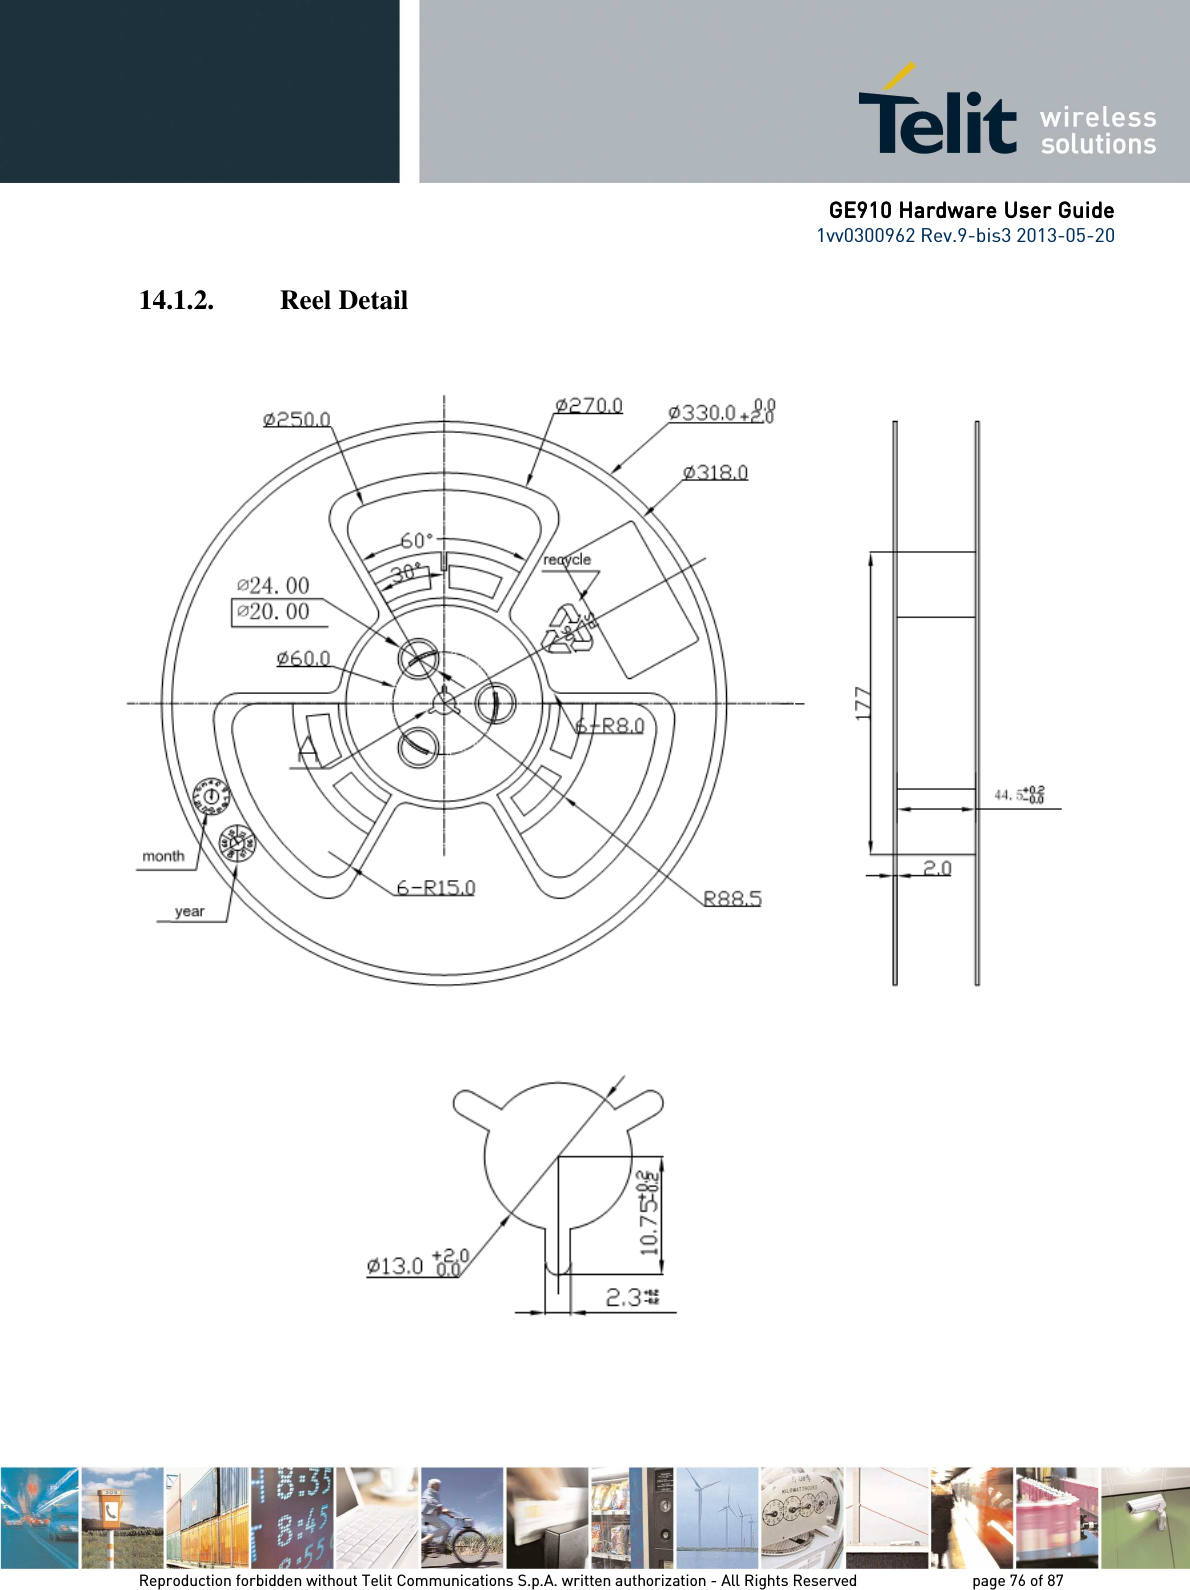      GE910 Hardware User GuideGE910 Hardware User GuideGE910 Hardware User GuideGE910 Hardware User Guide    1vv0300962 Rev.9-bis3 2013-05-20   Reproduction forbidden without Telit Communications S.p.A. written authorization - All Rights Reserved    page 76 of 87 Mod. 0805 2011-07 Rev.2 14.1.2. Reel Detail          